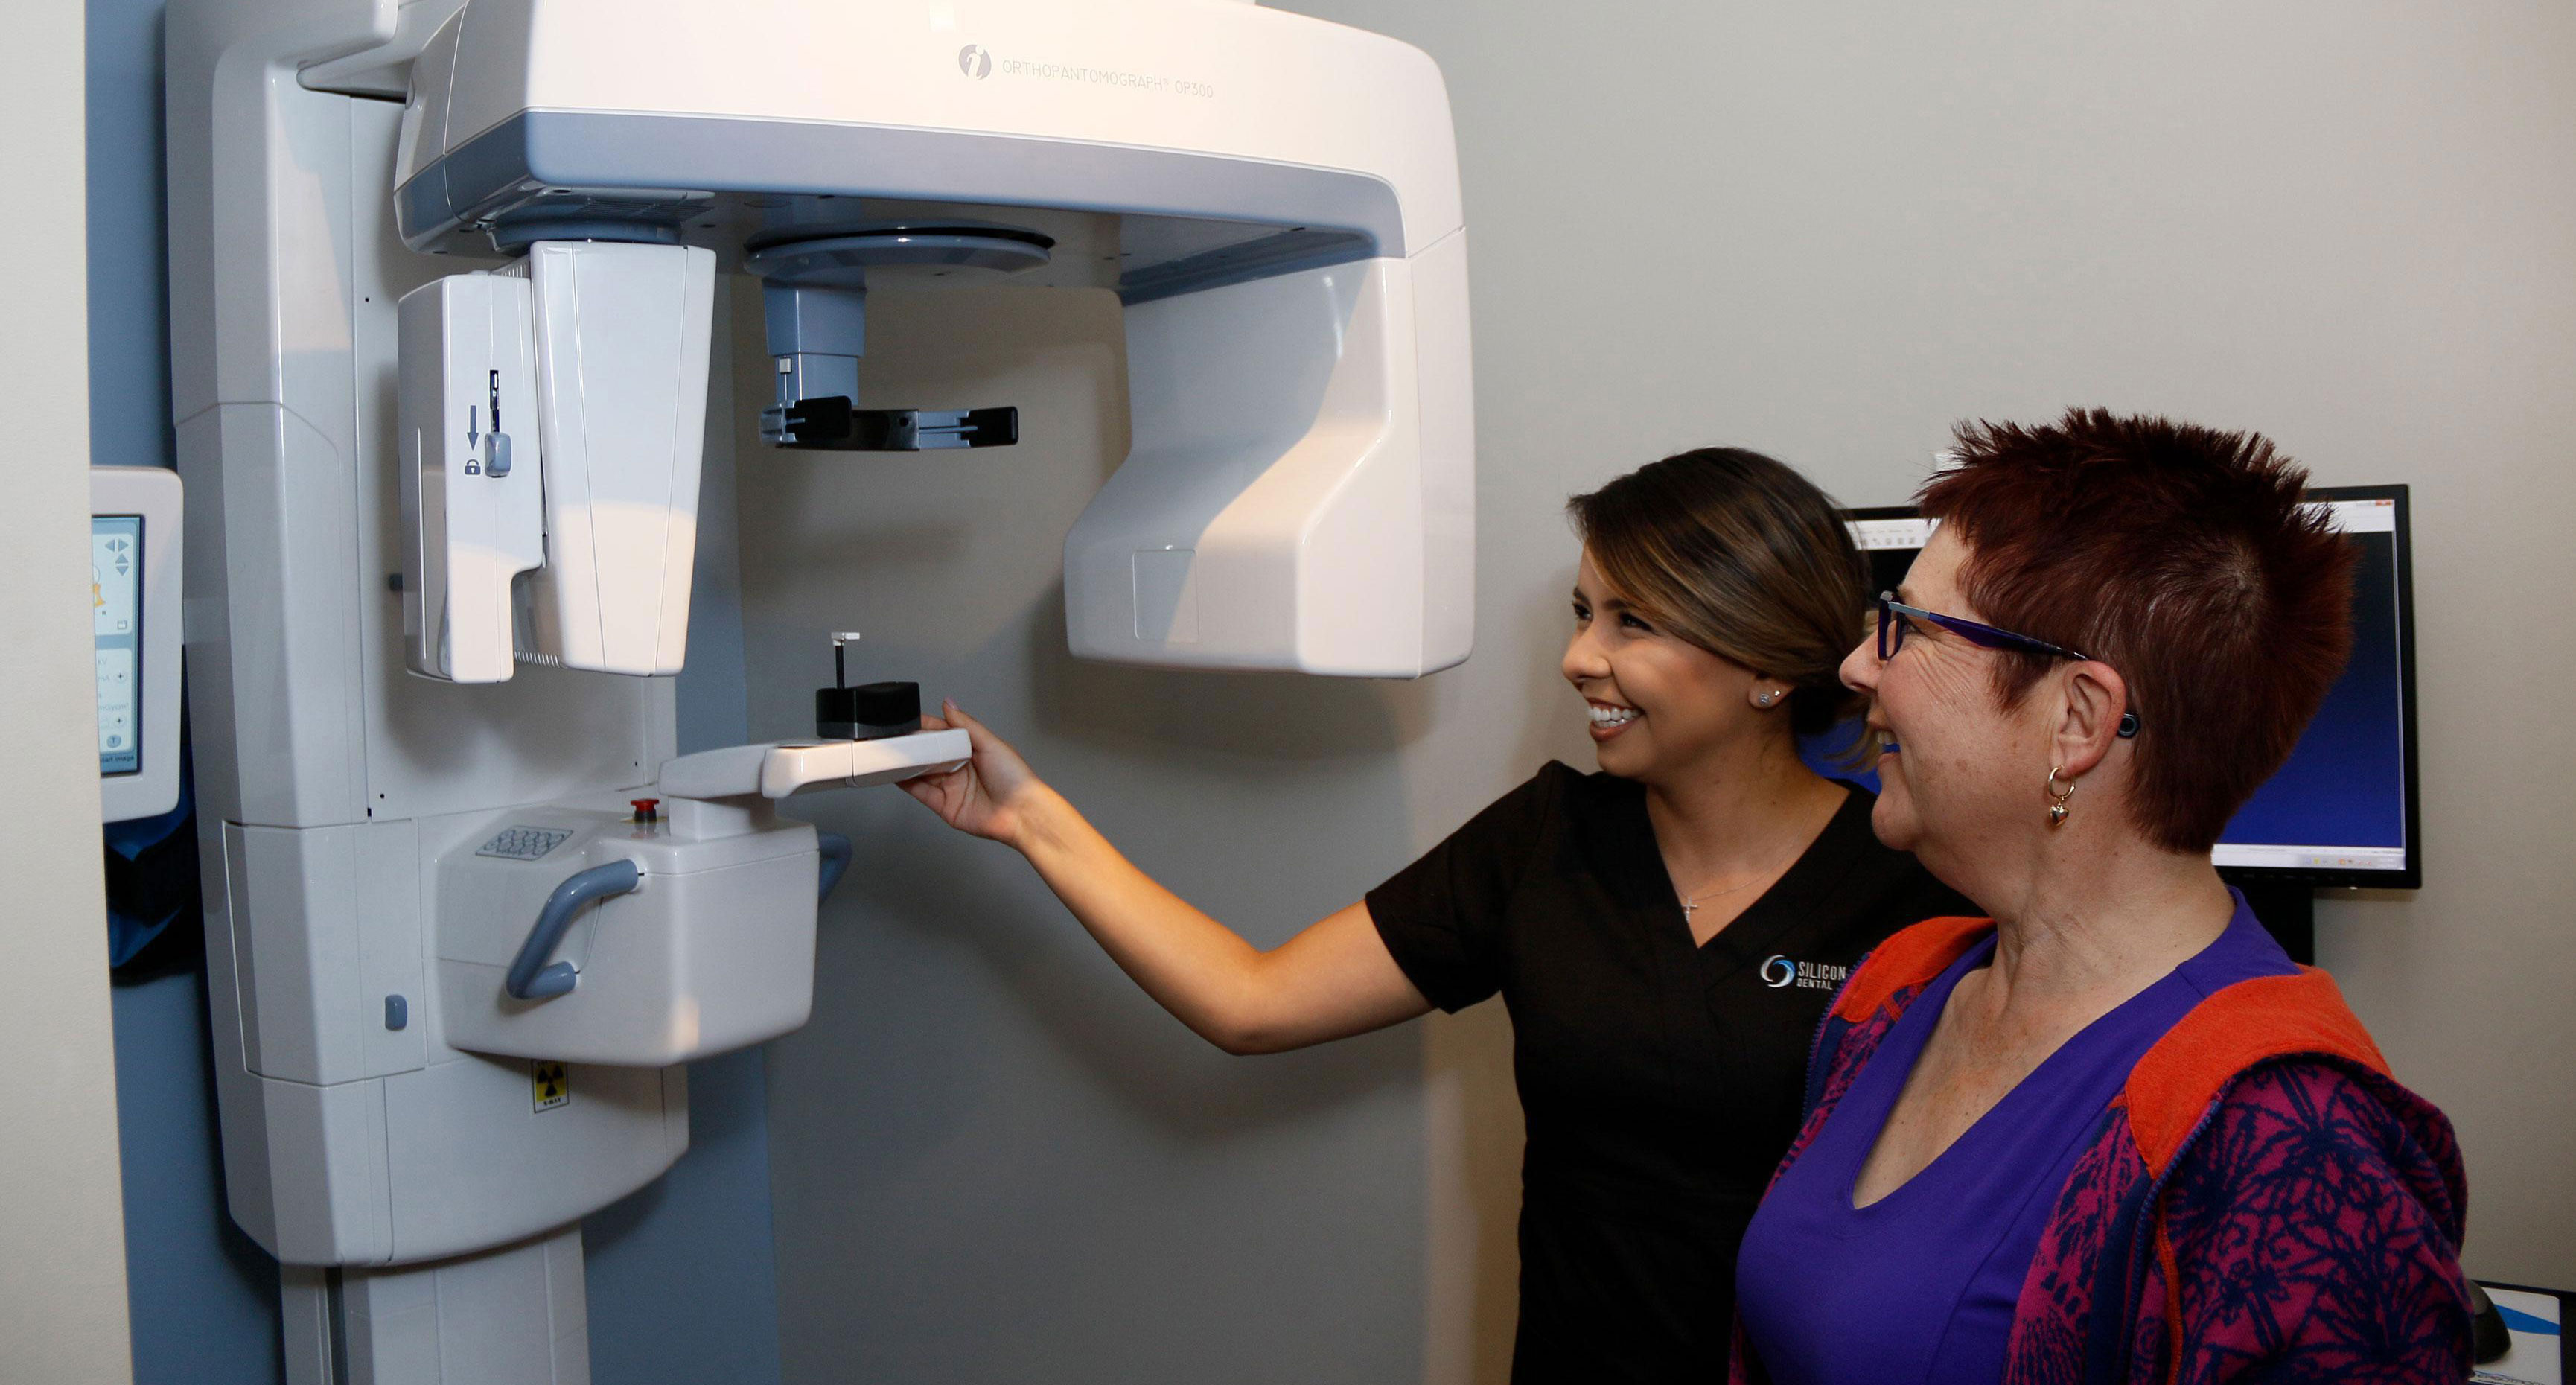 Two individuals standing in front of a modern dental or medical imaging equipment.